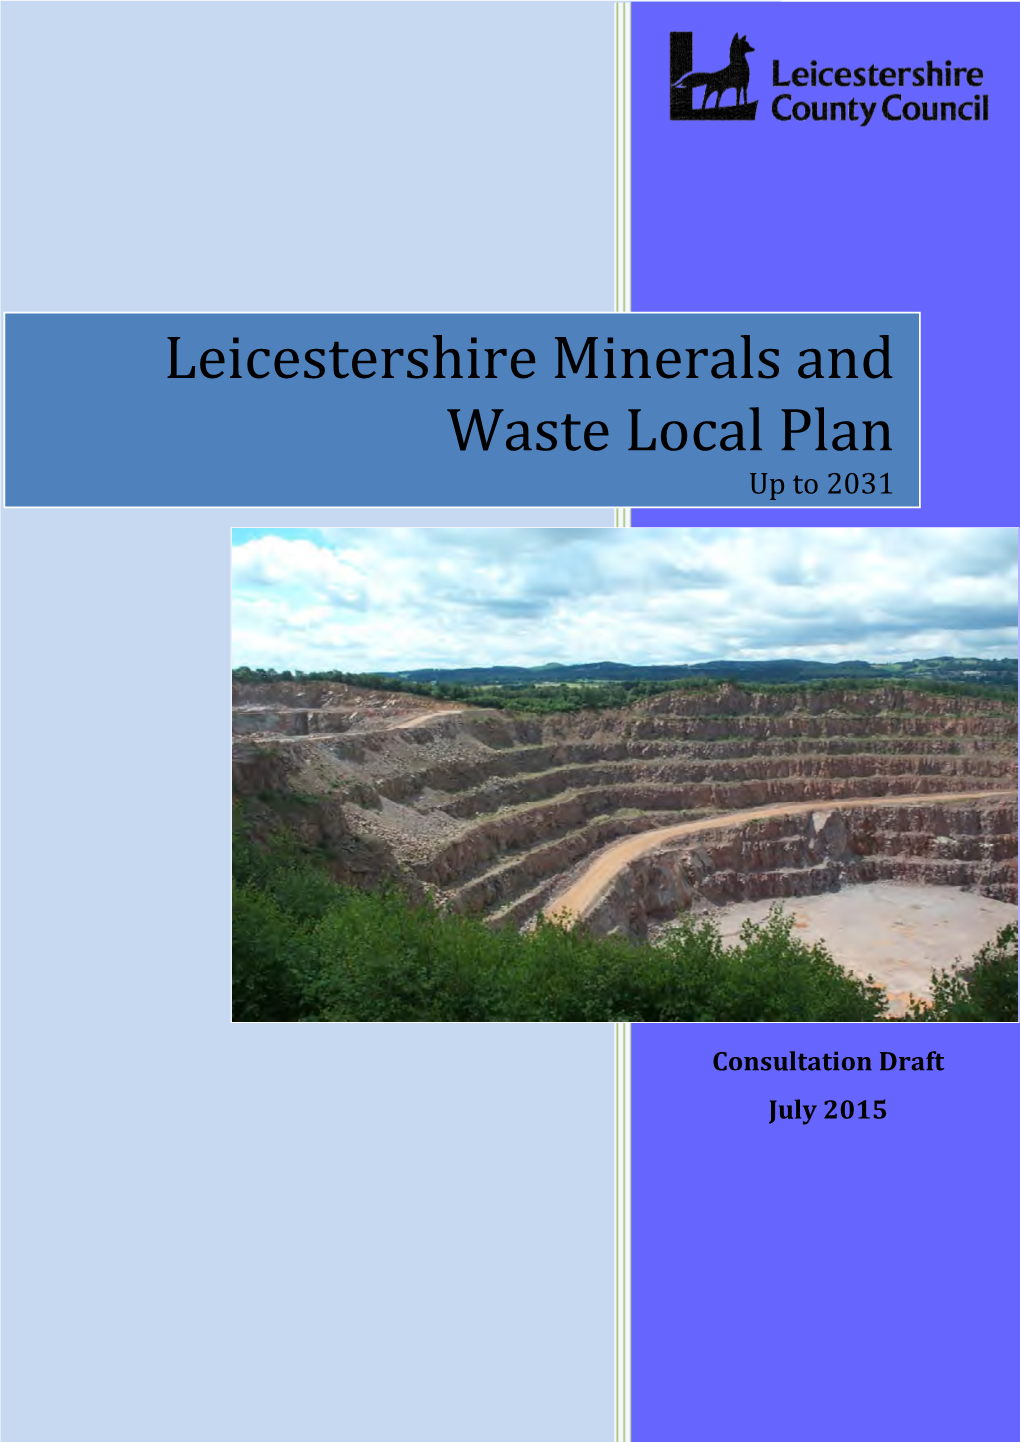 Leicestershire Minerals and Waste Local Plan up to 2031